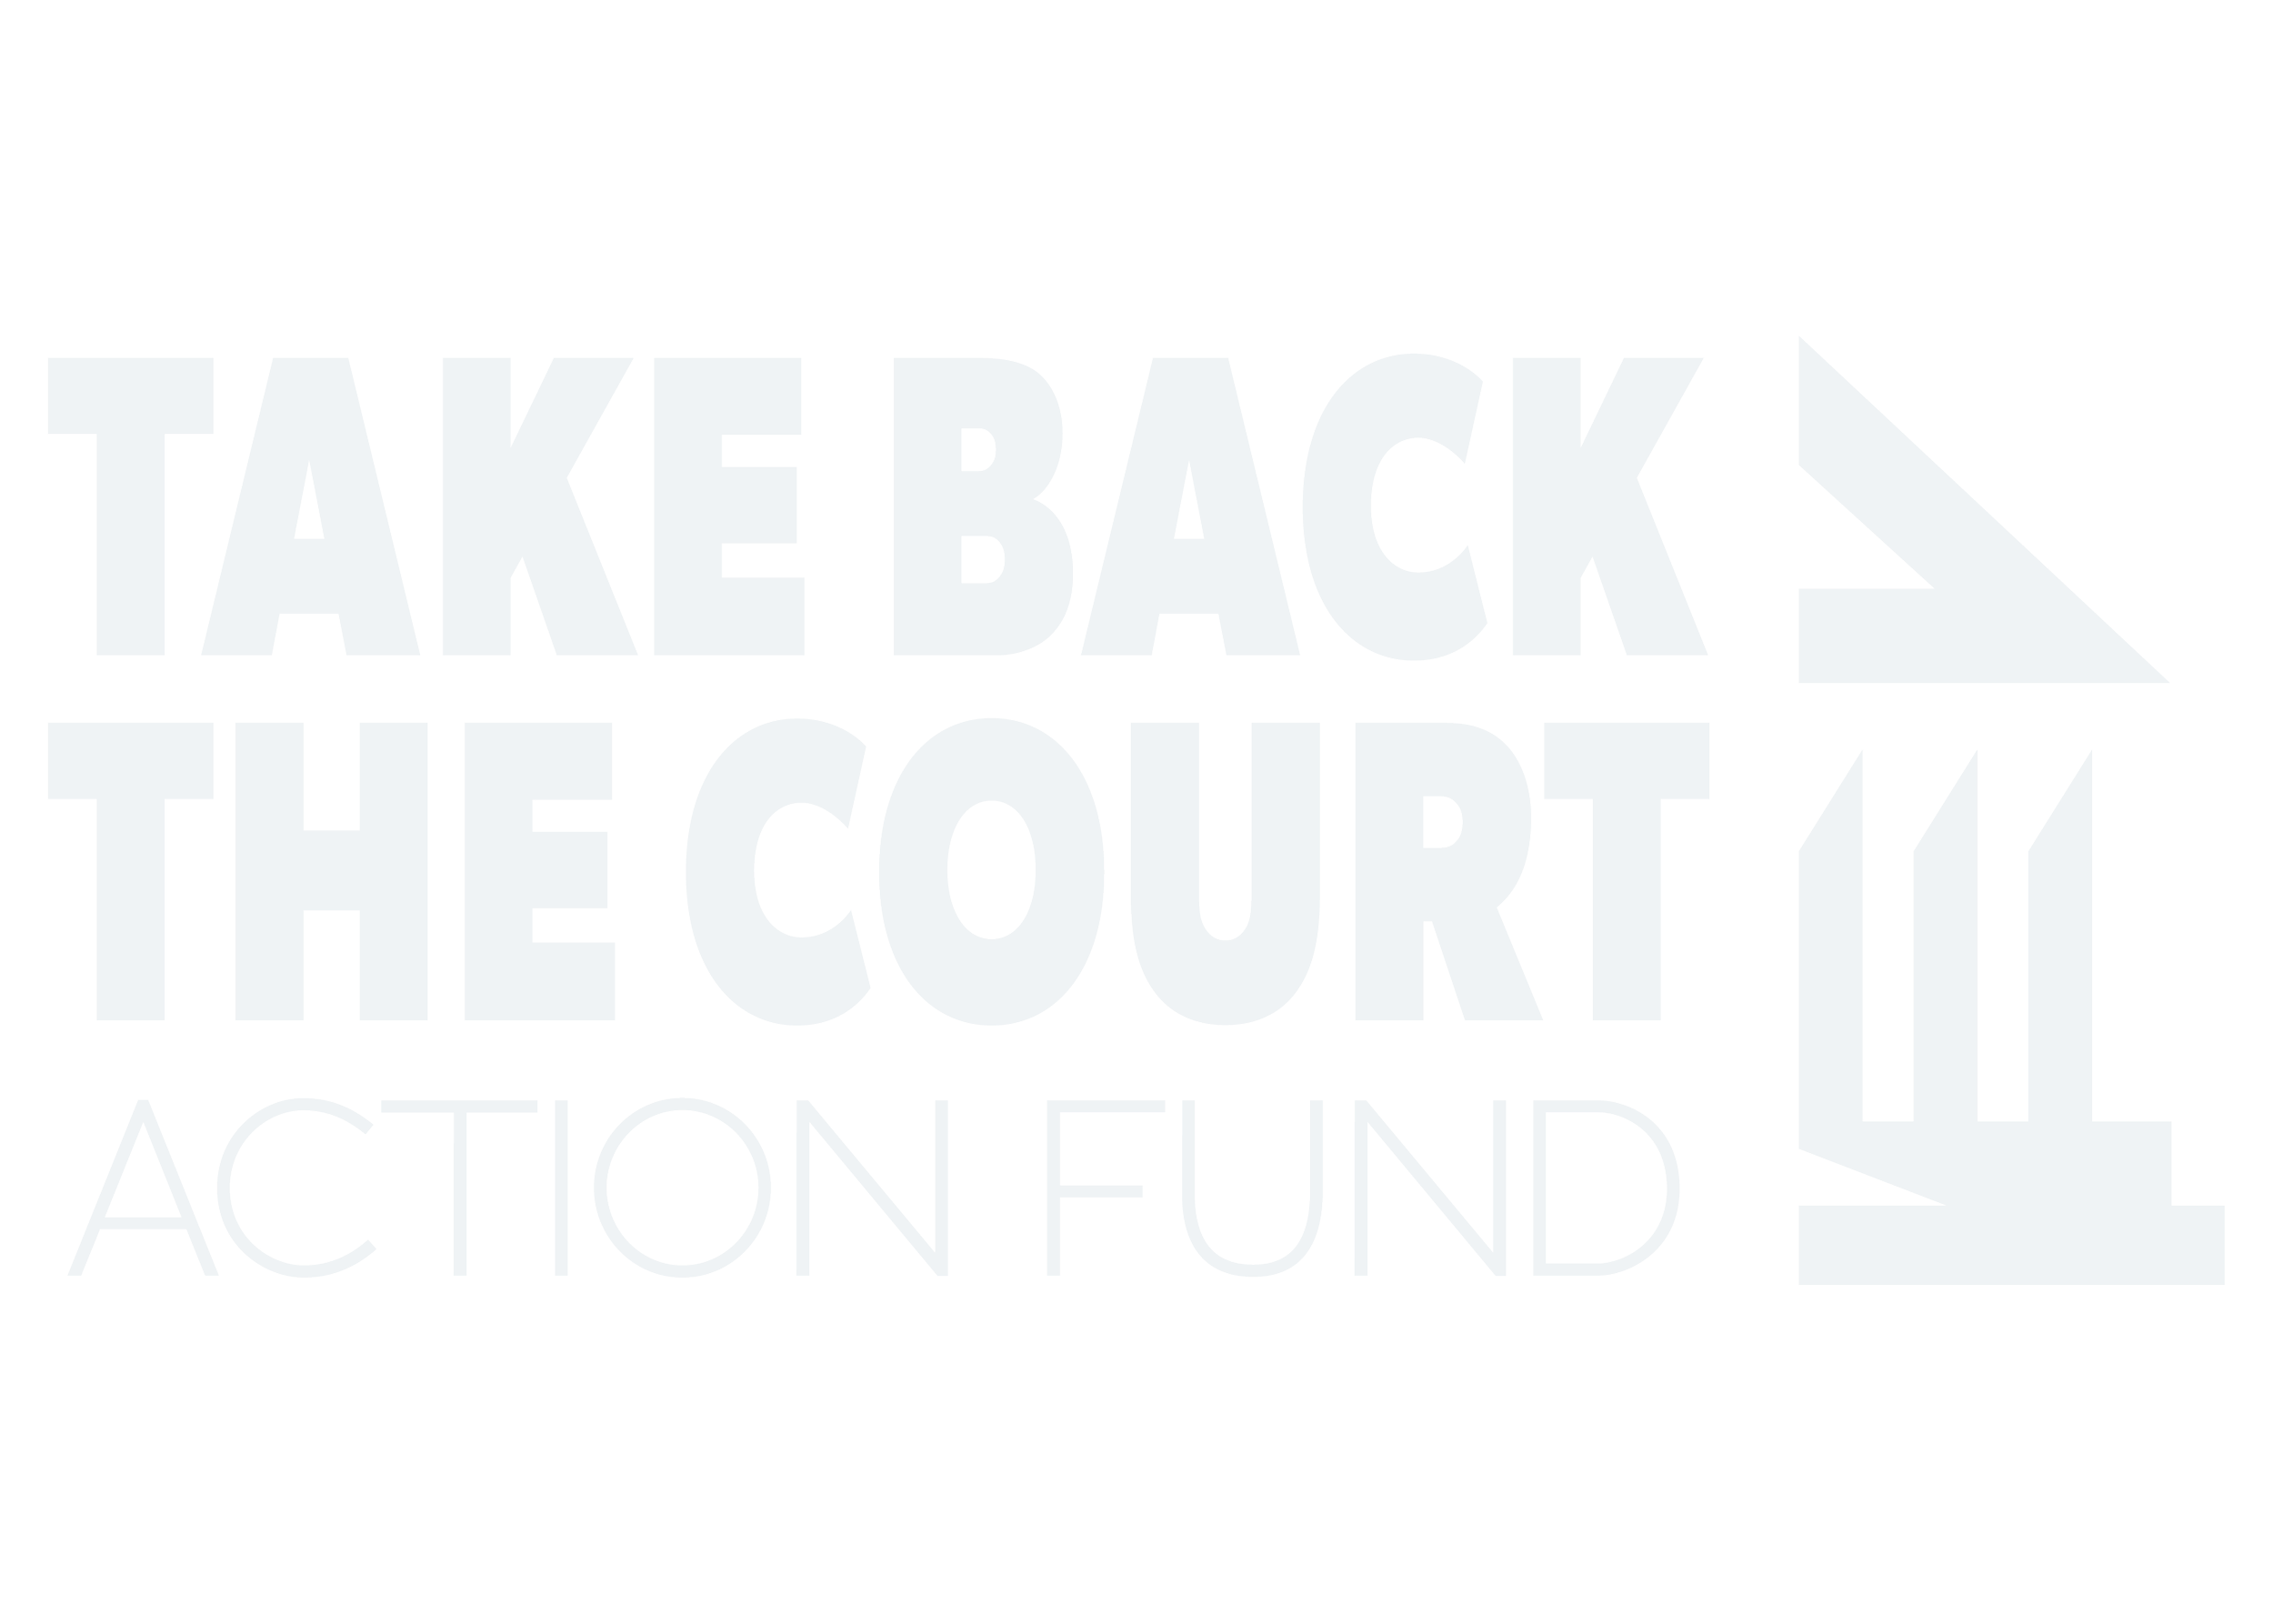 Take Back the Court Action Fund